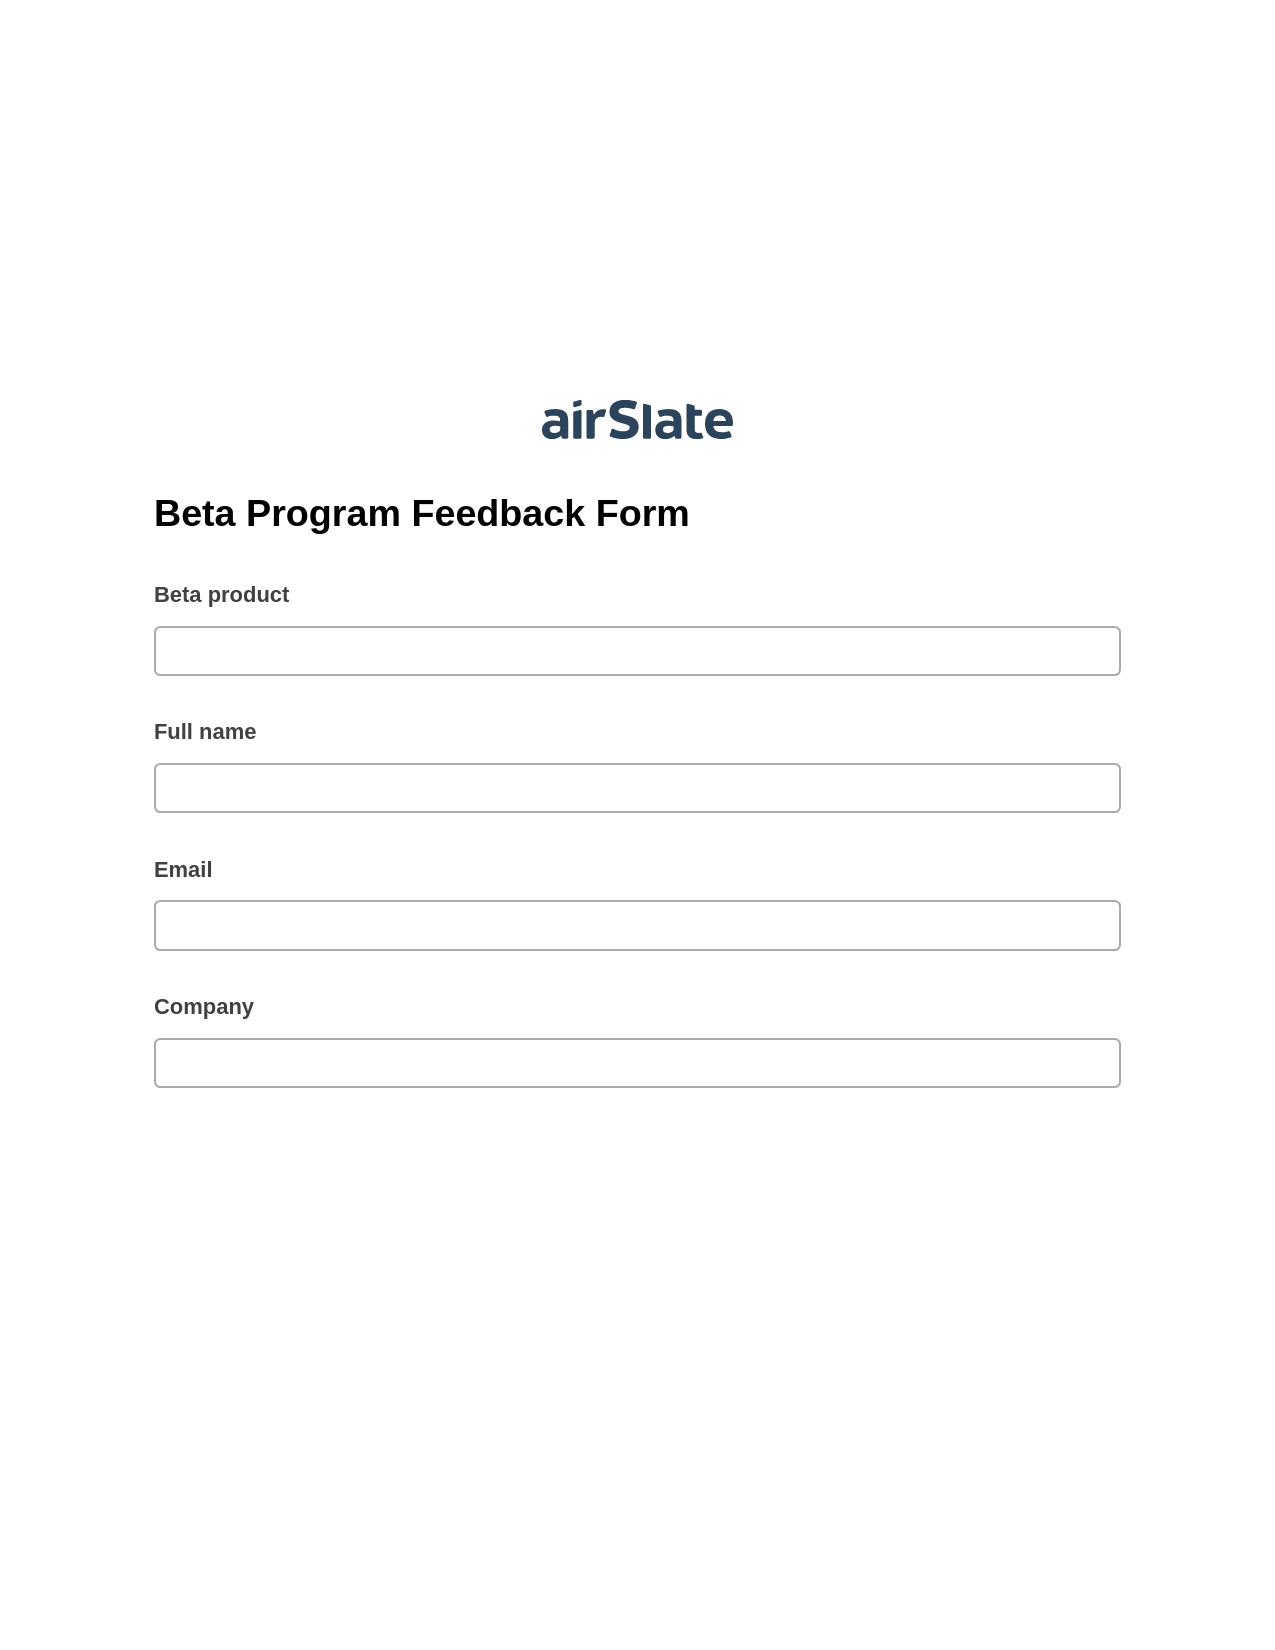 Beta Program Feedback Form Pre-fill from Litmos bot, Export to MS Dynamics 365 Bot, Export to Excel 365 Bot